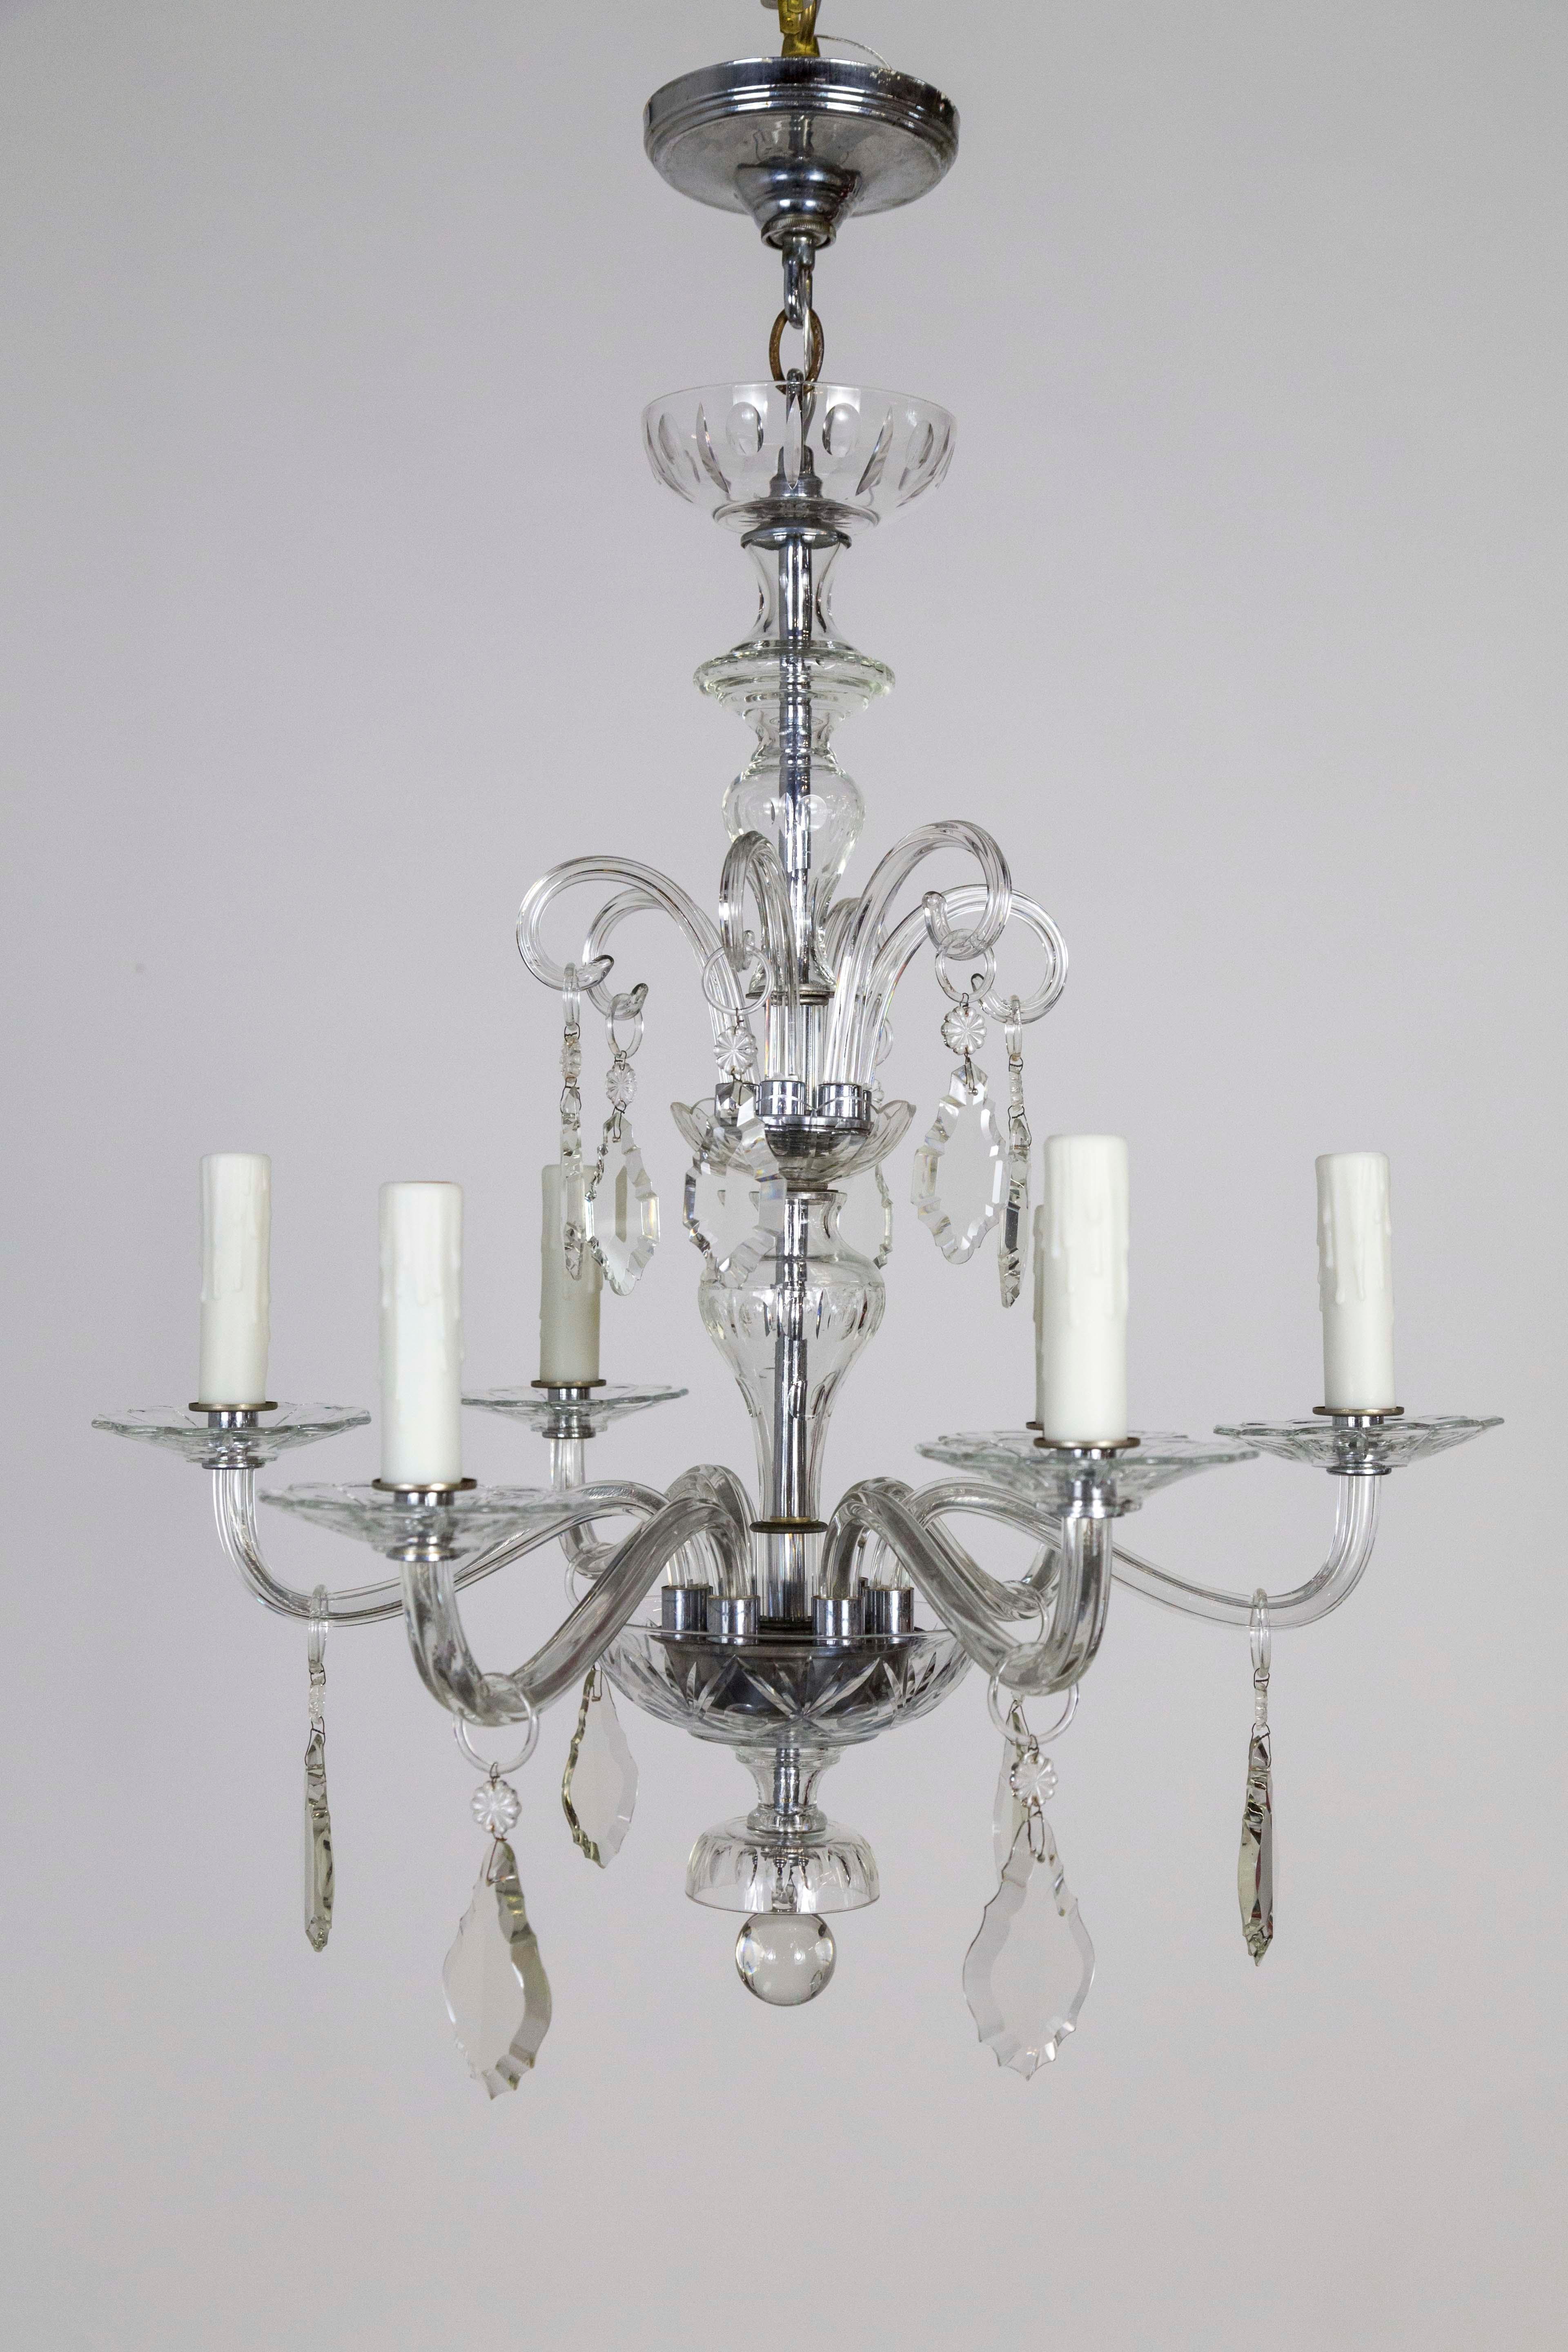 An elegant, antique chandelier; streamlined design with pendeloques crystals hanging from rings off of the 6 glass arms; decorative, molded accents on bowl and bobeches. Measures: 22